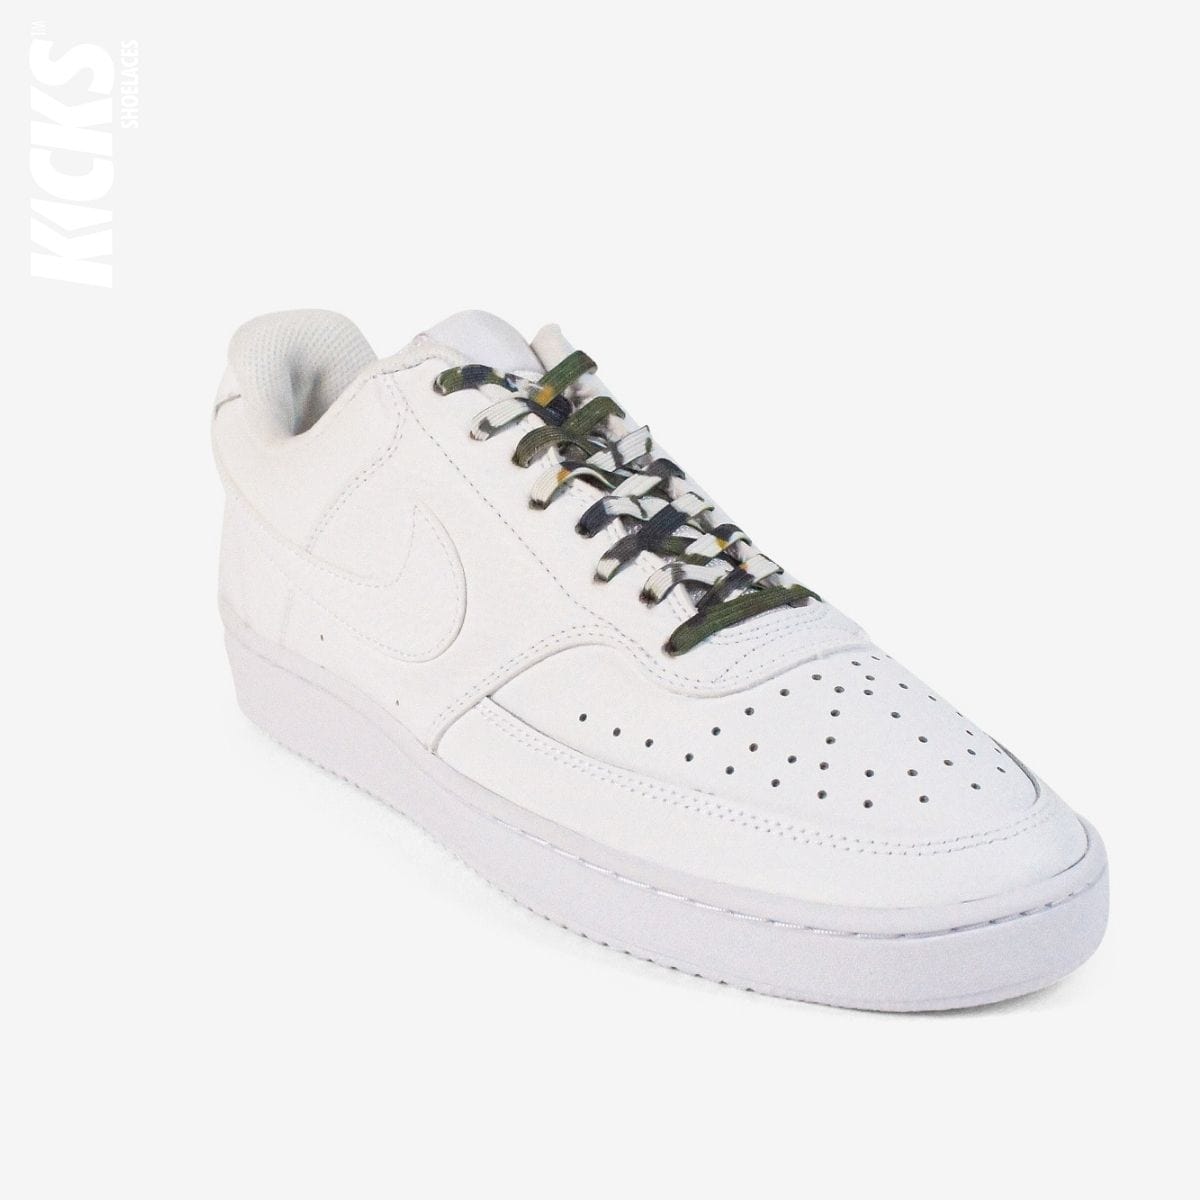 elastic-no-tie-shoelaces-with-army-green-laces-on-nike-white-sneakers